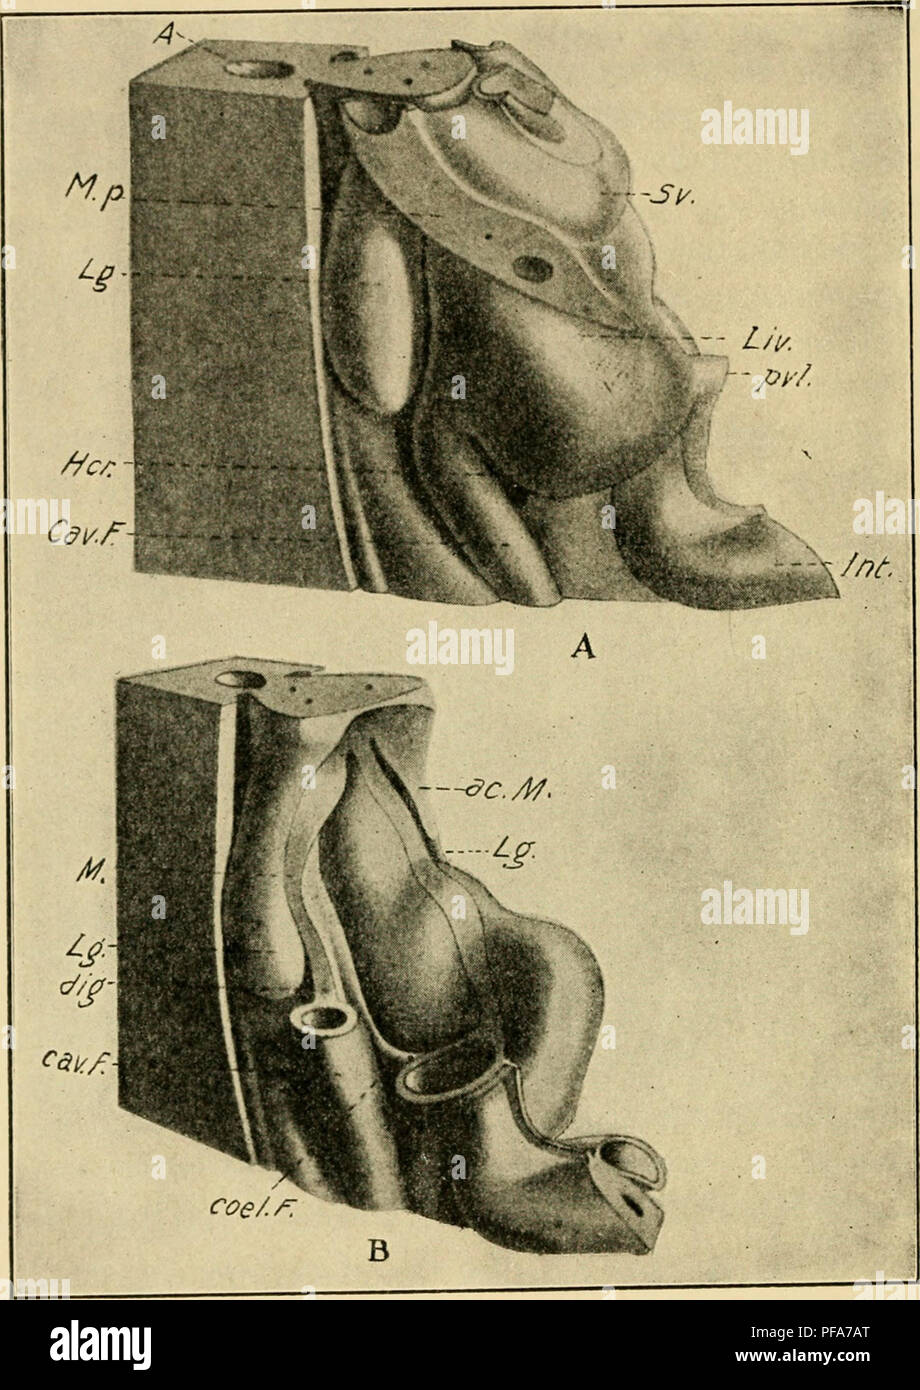 . The development of the chick : an introduction to embryology. Embryology; Chickens -- Embryos. 336 THE DEVELOPMENT OF THE CHICK. Fig. 193. — Reconstruction of the septum transversum and associated mesenteries of a chick embryo of 5 to 6 days. (After Ravn.) A. Entire. B. After removal of the hver and sinus venosus. A., Aorta, ac. M., Accessory mesentery. cav. F., Caval fold. coel. F., Cccliac fold. Her., Hiatus communis reces- sum. Int., Intestine. Lg., Lung. Liv., Liver, m. p., Pleuro- pericardial membrane, pvl., Primary ventral ligament of the liver. Sv., Sinus venosus. mesentery), uniting  Stock Photo